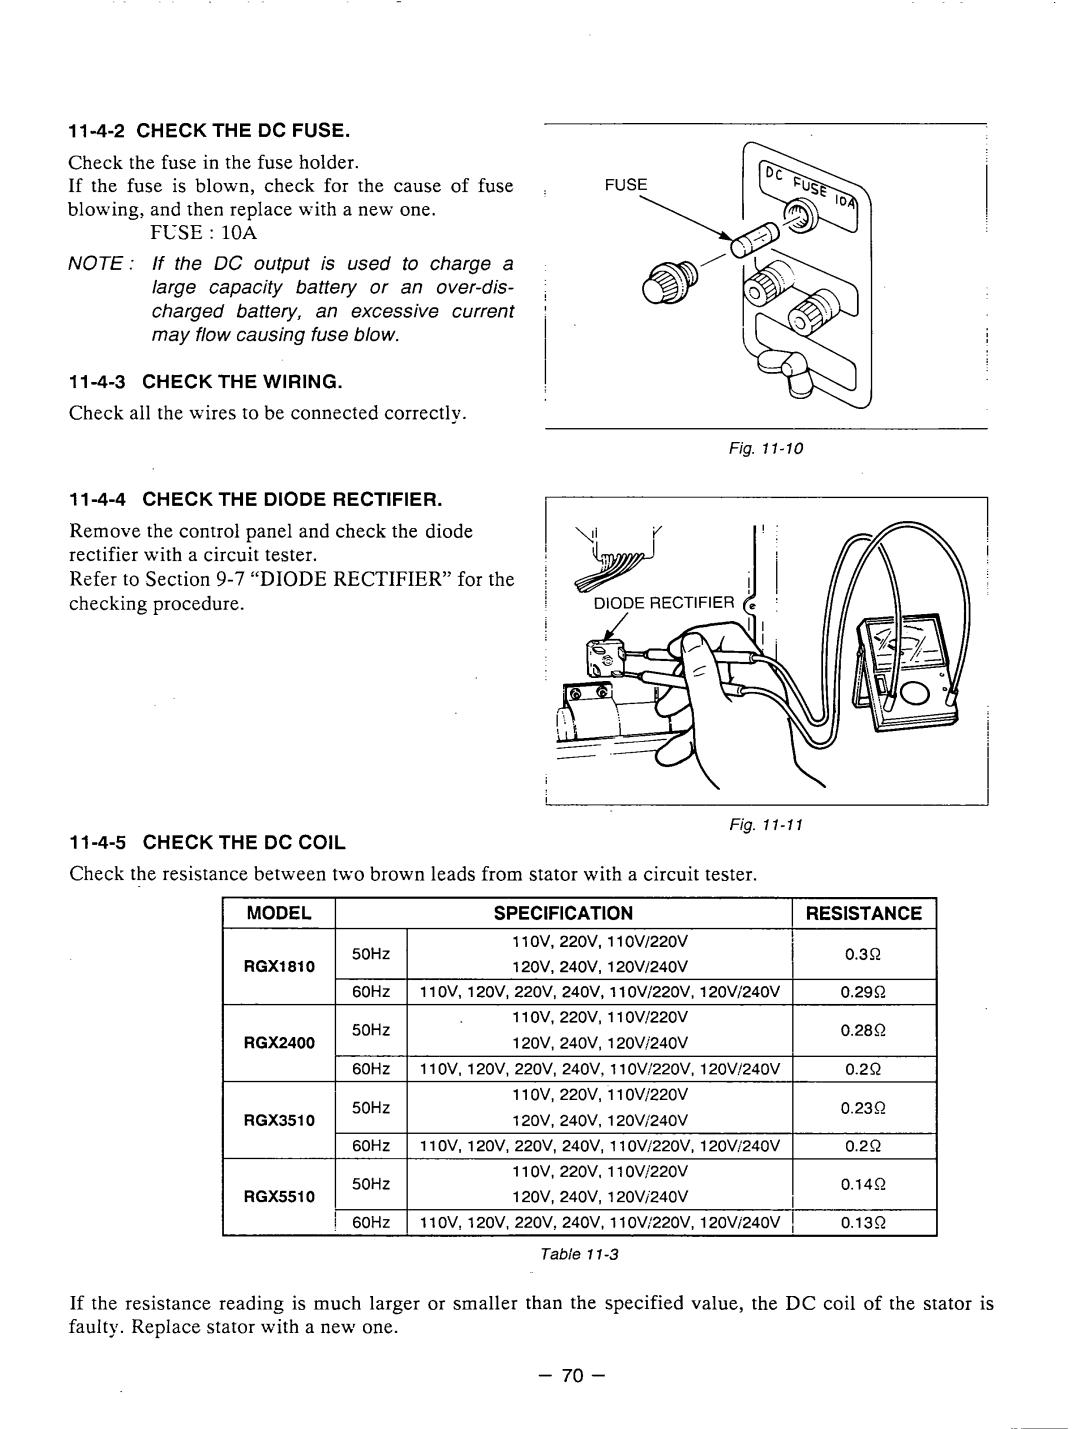 Subaru Robin Power Products RGX3510 manual Check the fuse in the fuse holder 